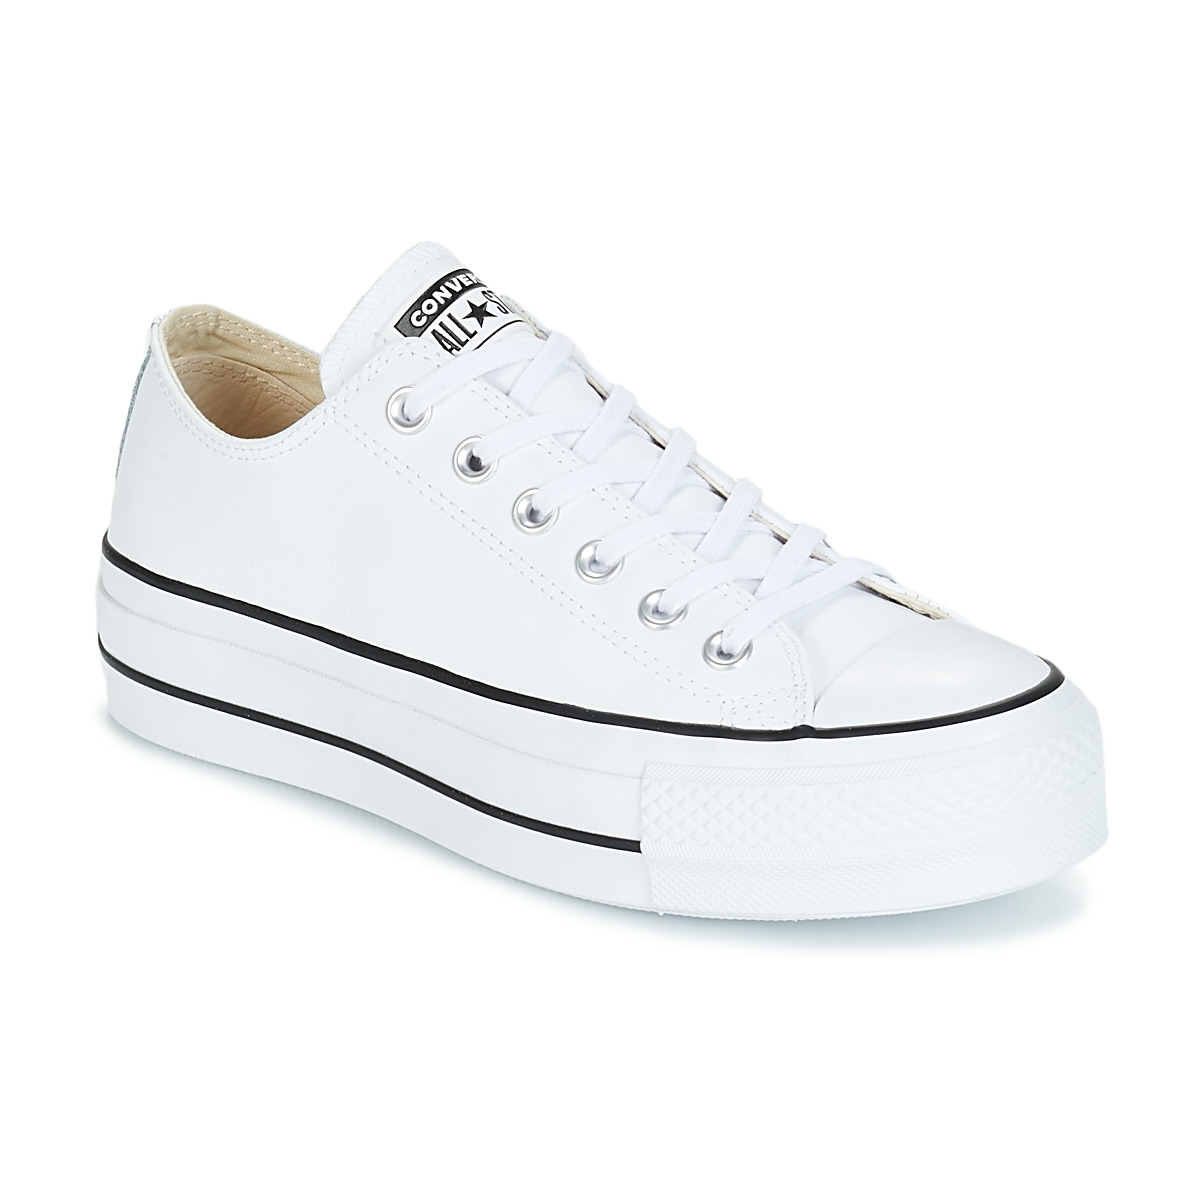 Xαμηλά Sneakers Converse CHUCK TAYLOR ALL STAR LIFT CLEAN OX LEATHER Δέρμα